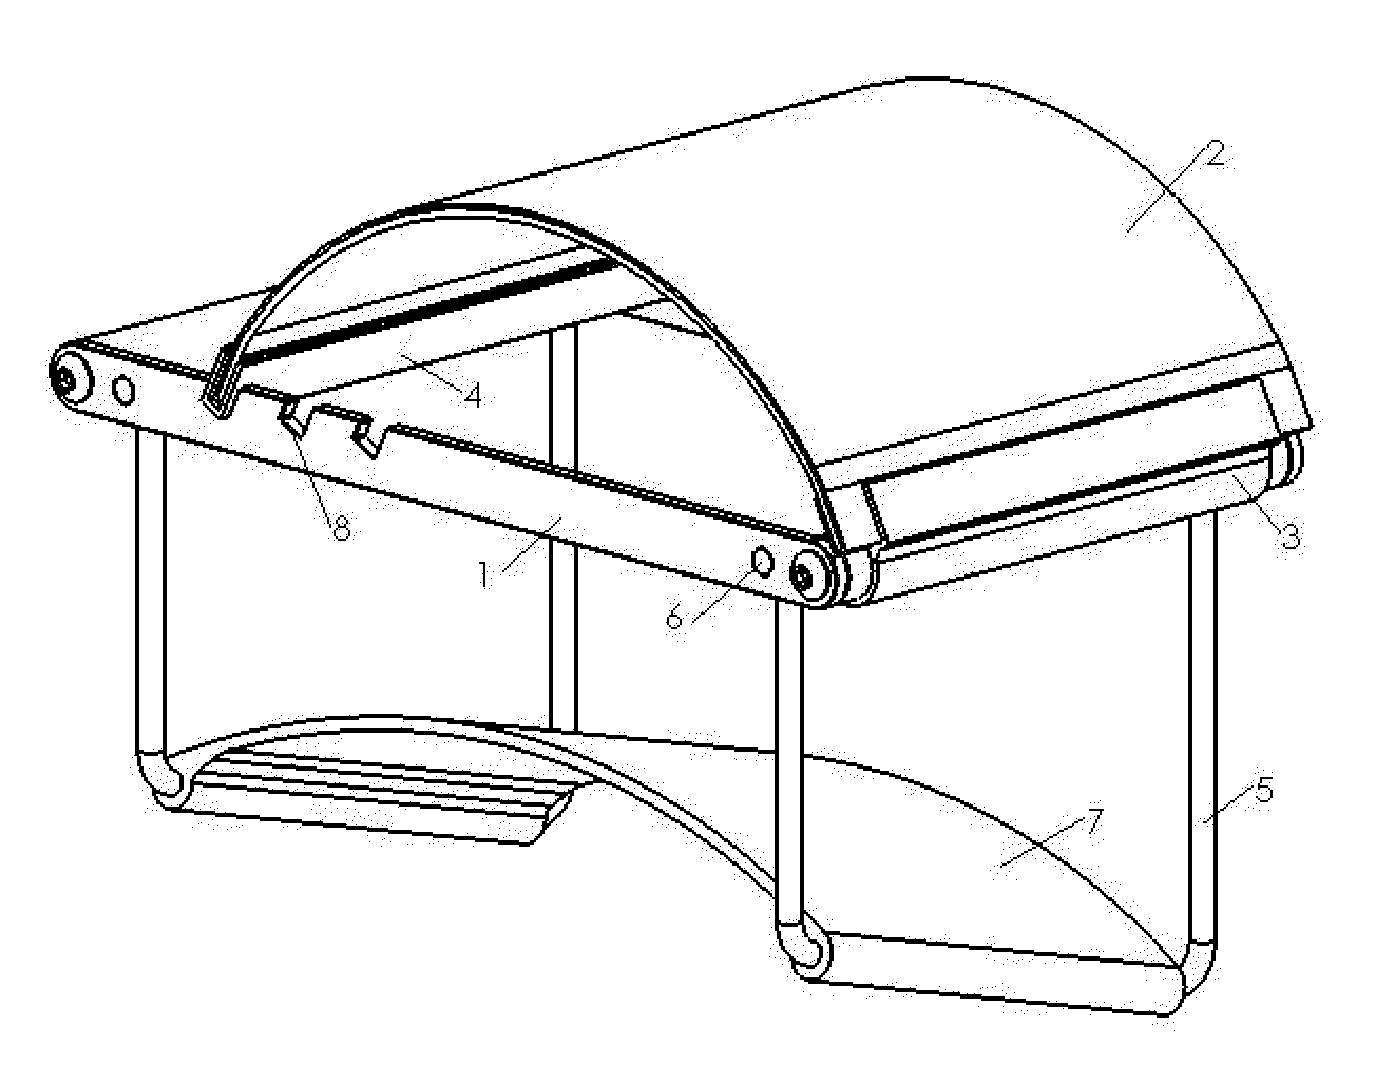 Foldable and height adjustable support for musical instrument used in seated position